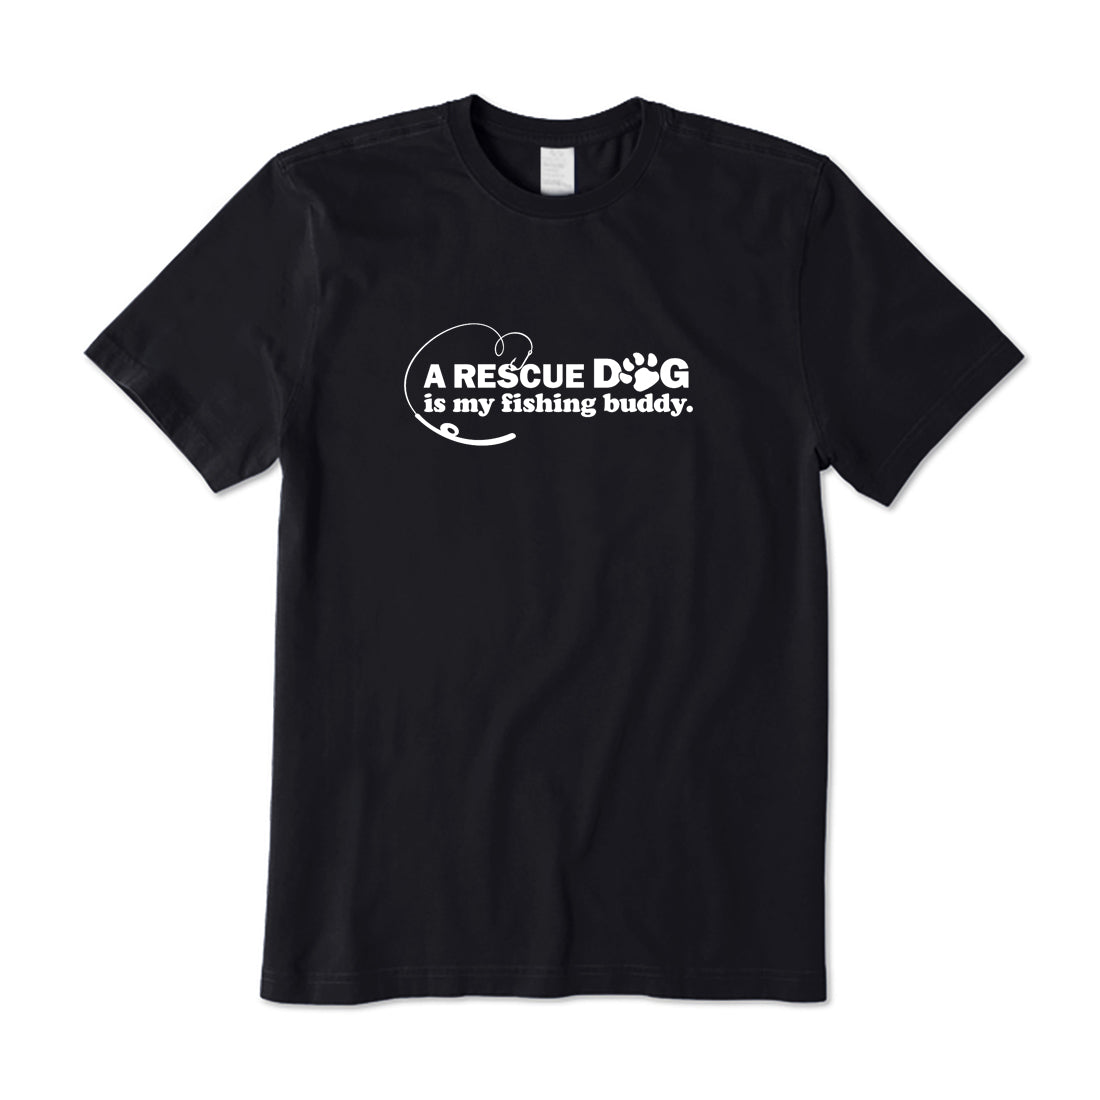 A Rescue Dog is my Fishing Buddy T-Shirt